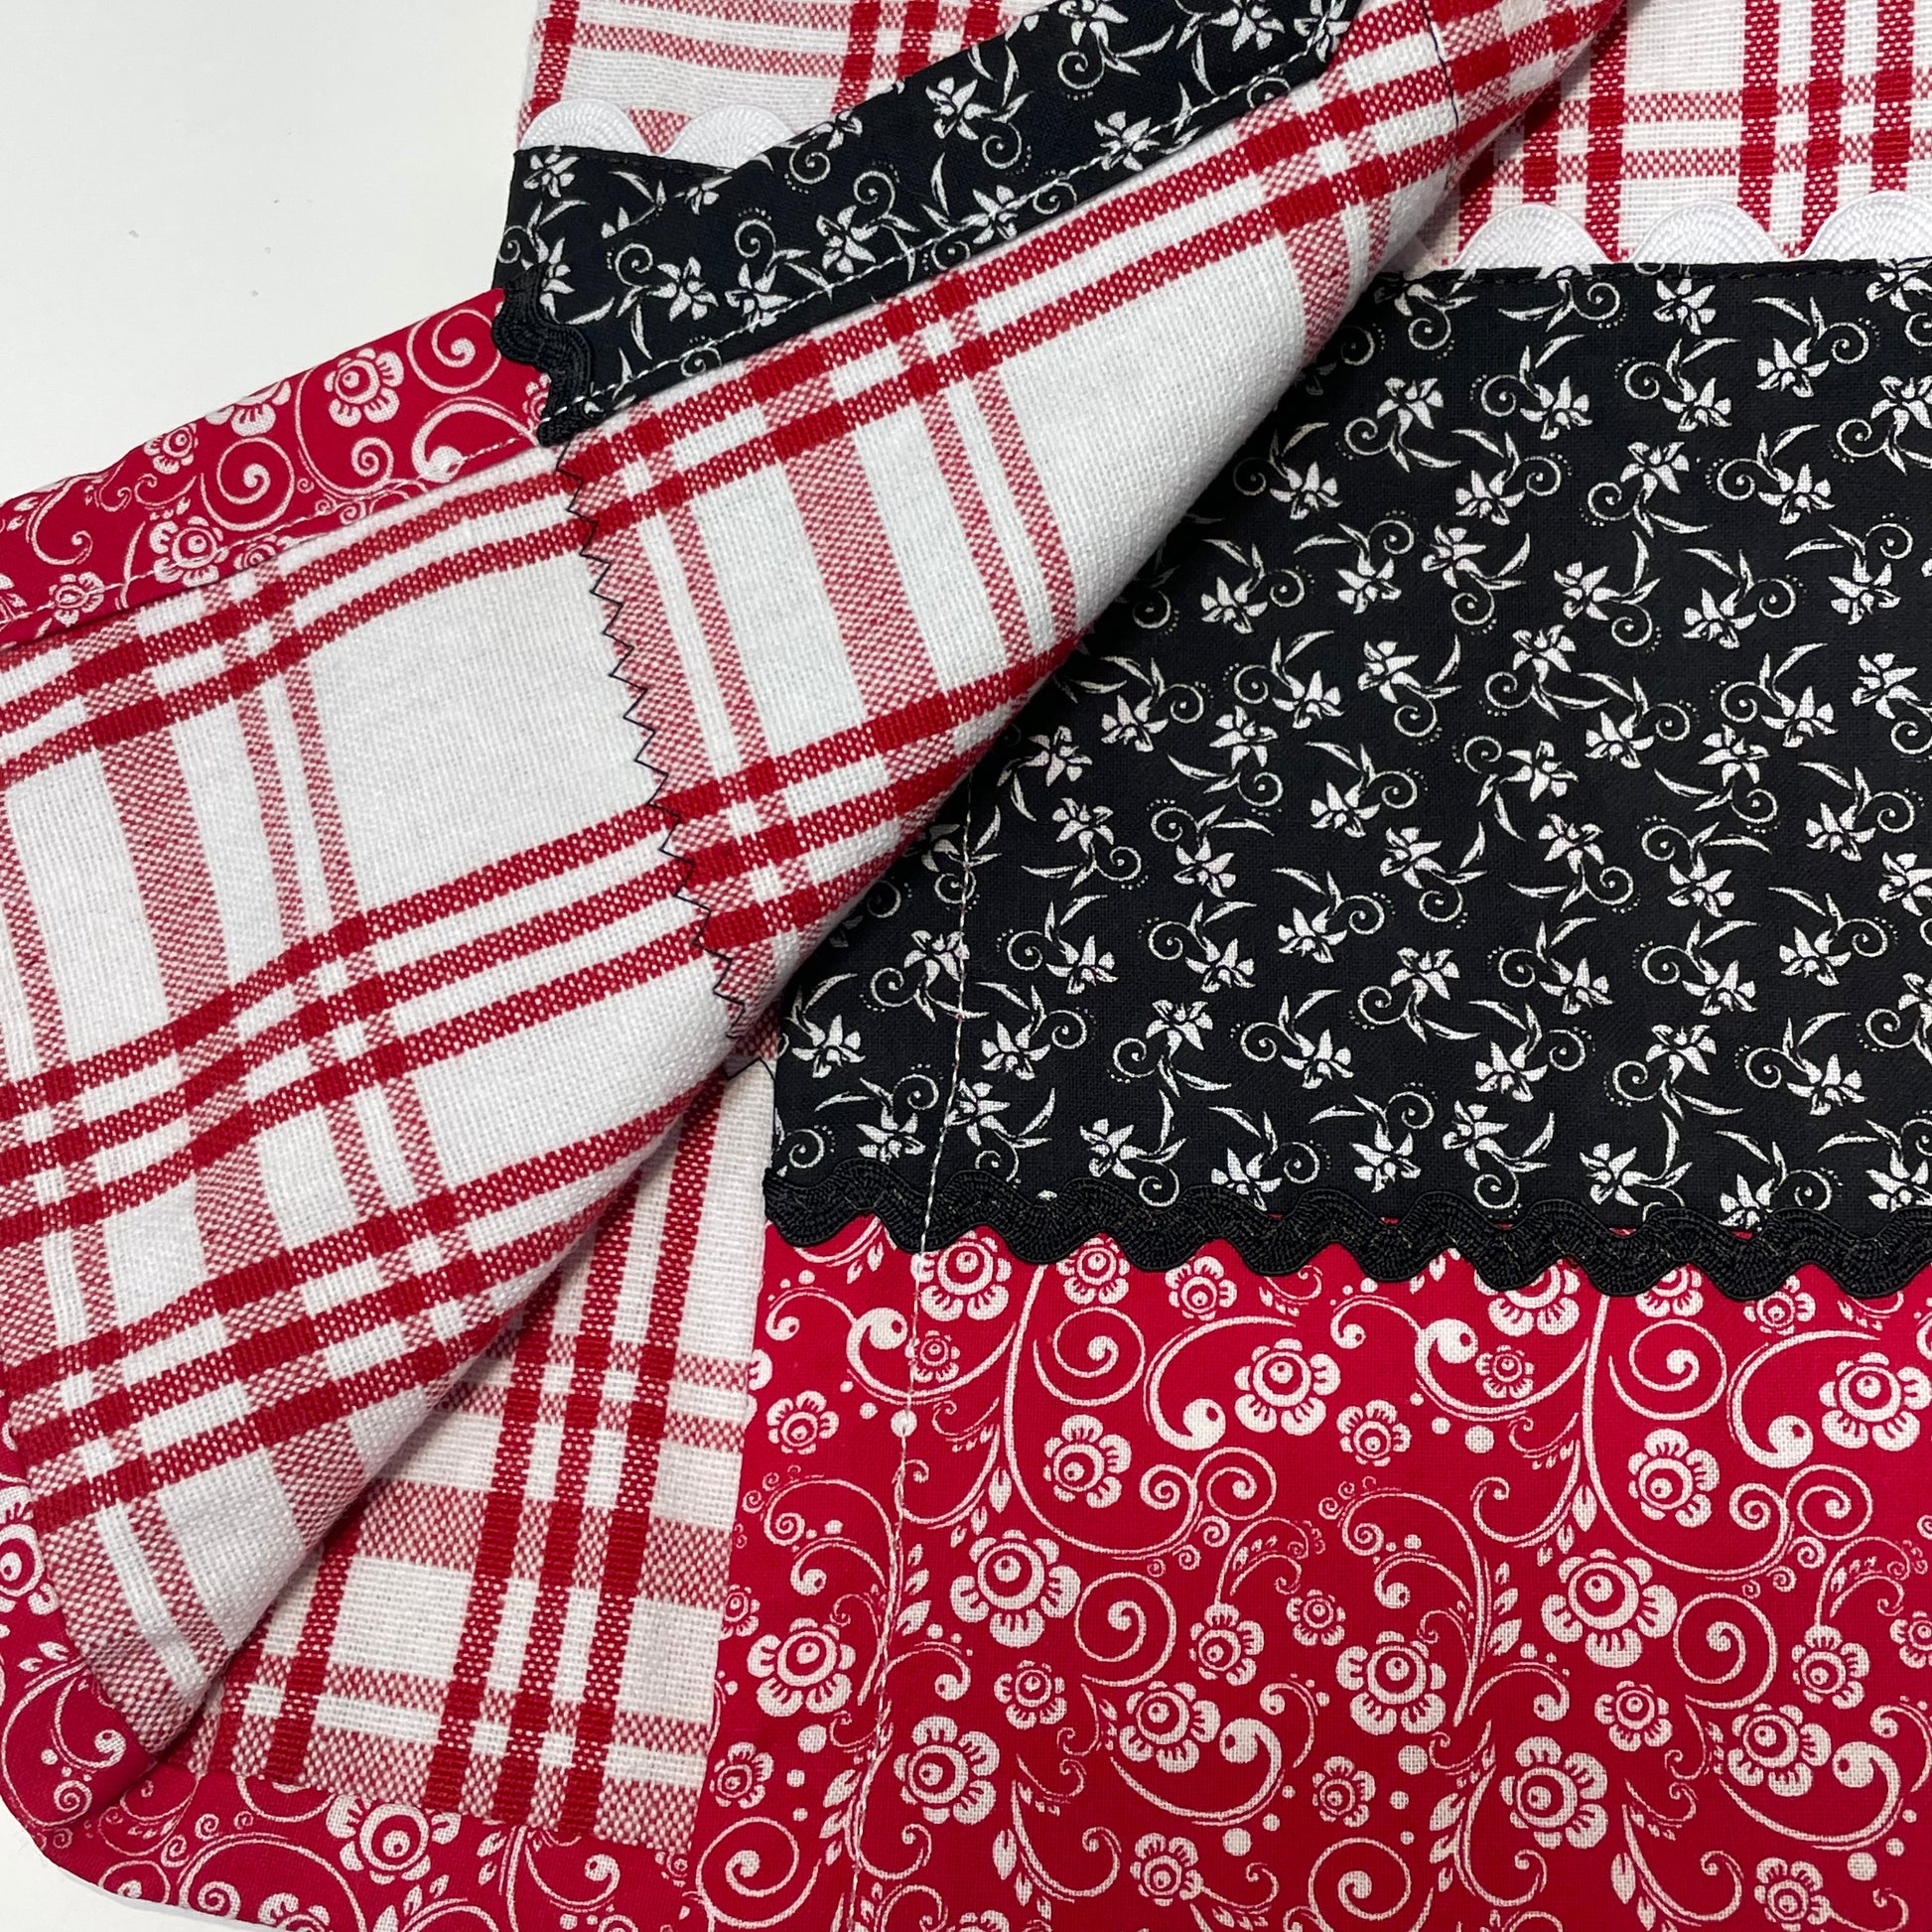 Country Style Dish Towel in Red and White check toweling with black and red quilting cotton. Featuring Black Ric Rac and button embellishments. Part of a mix and match line of farmhouse fabulous decor. Browse the entire collection. Then check out the Home Stitchery Decor YouTube Channel